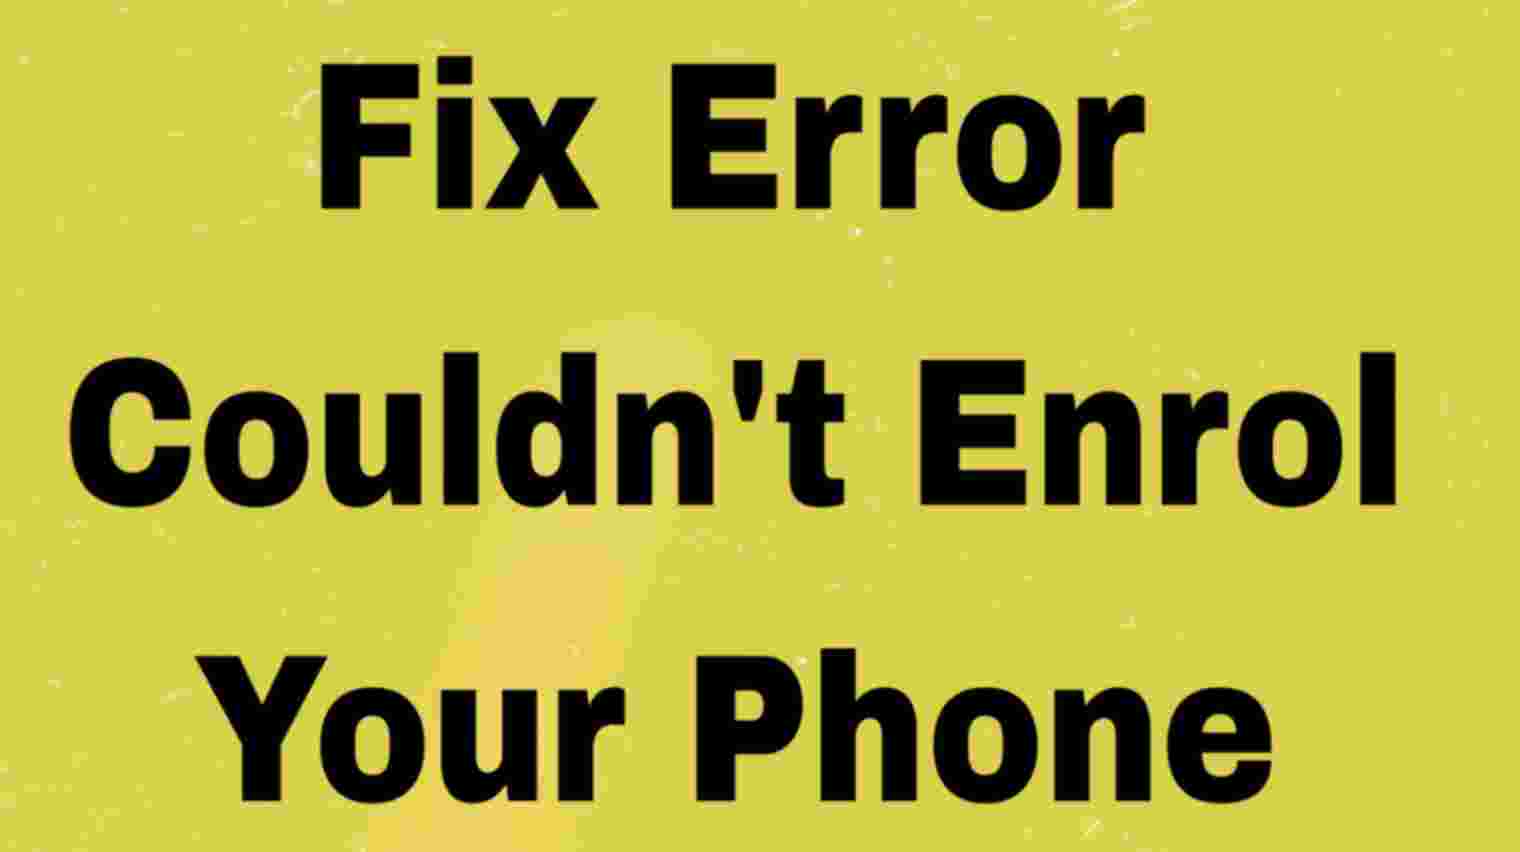 Error Couldn't Enrol Your Phone